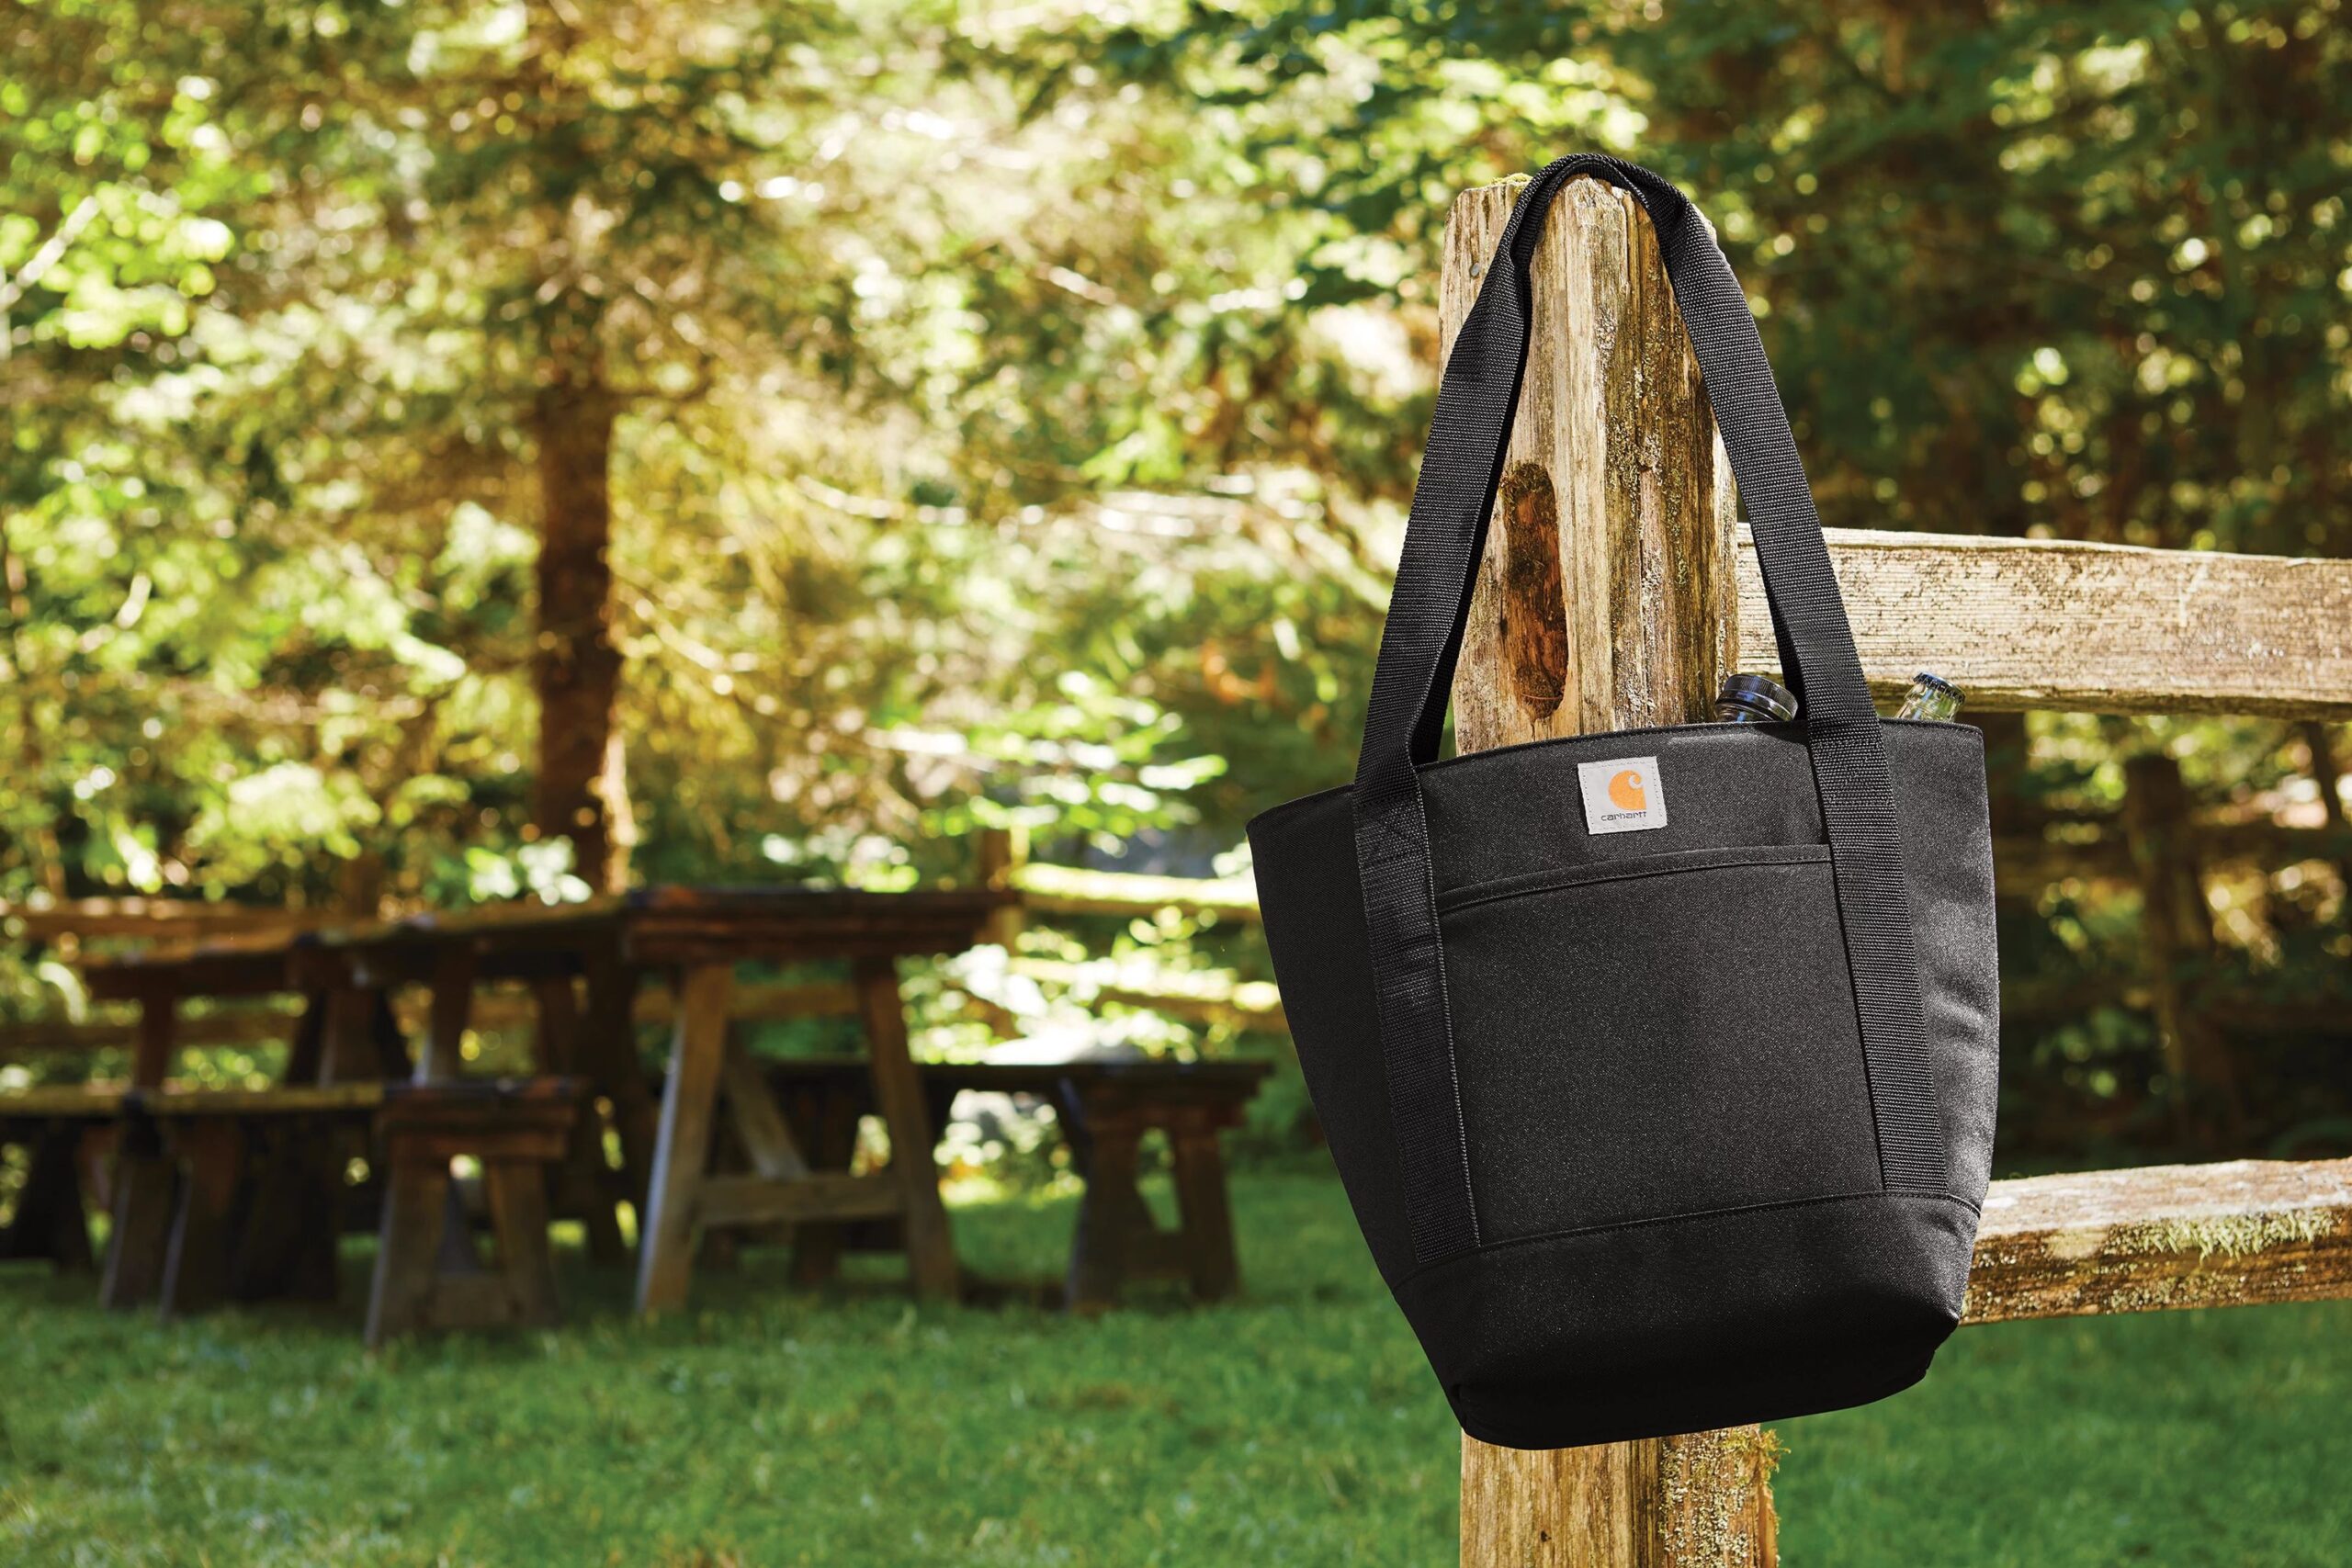 Picture of tote bag hanging on a fence post and a picnic table in the background